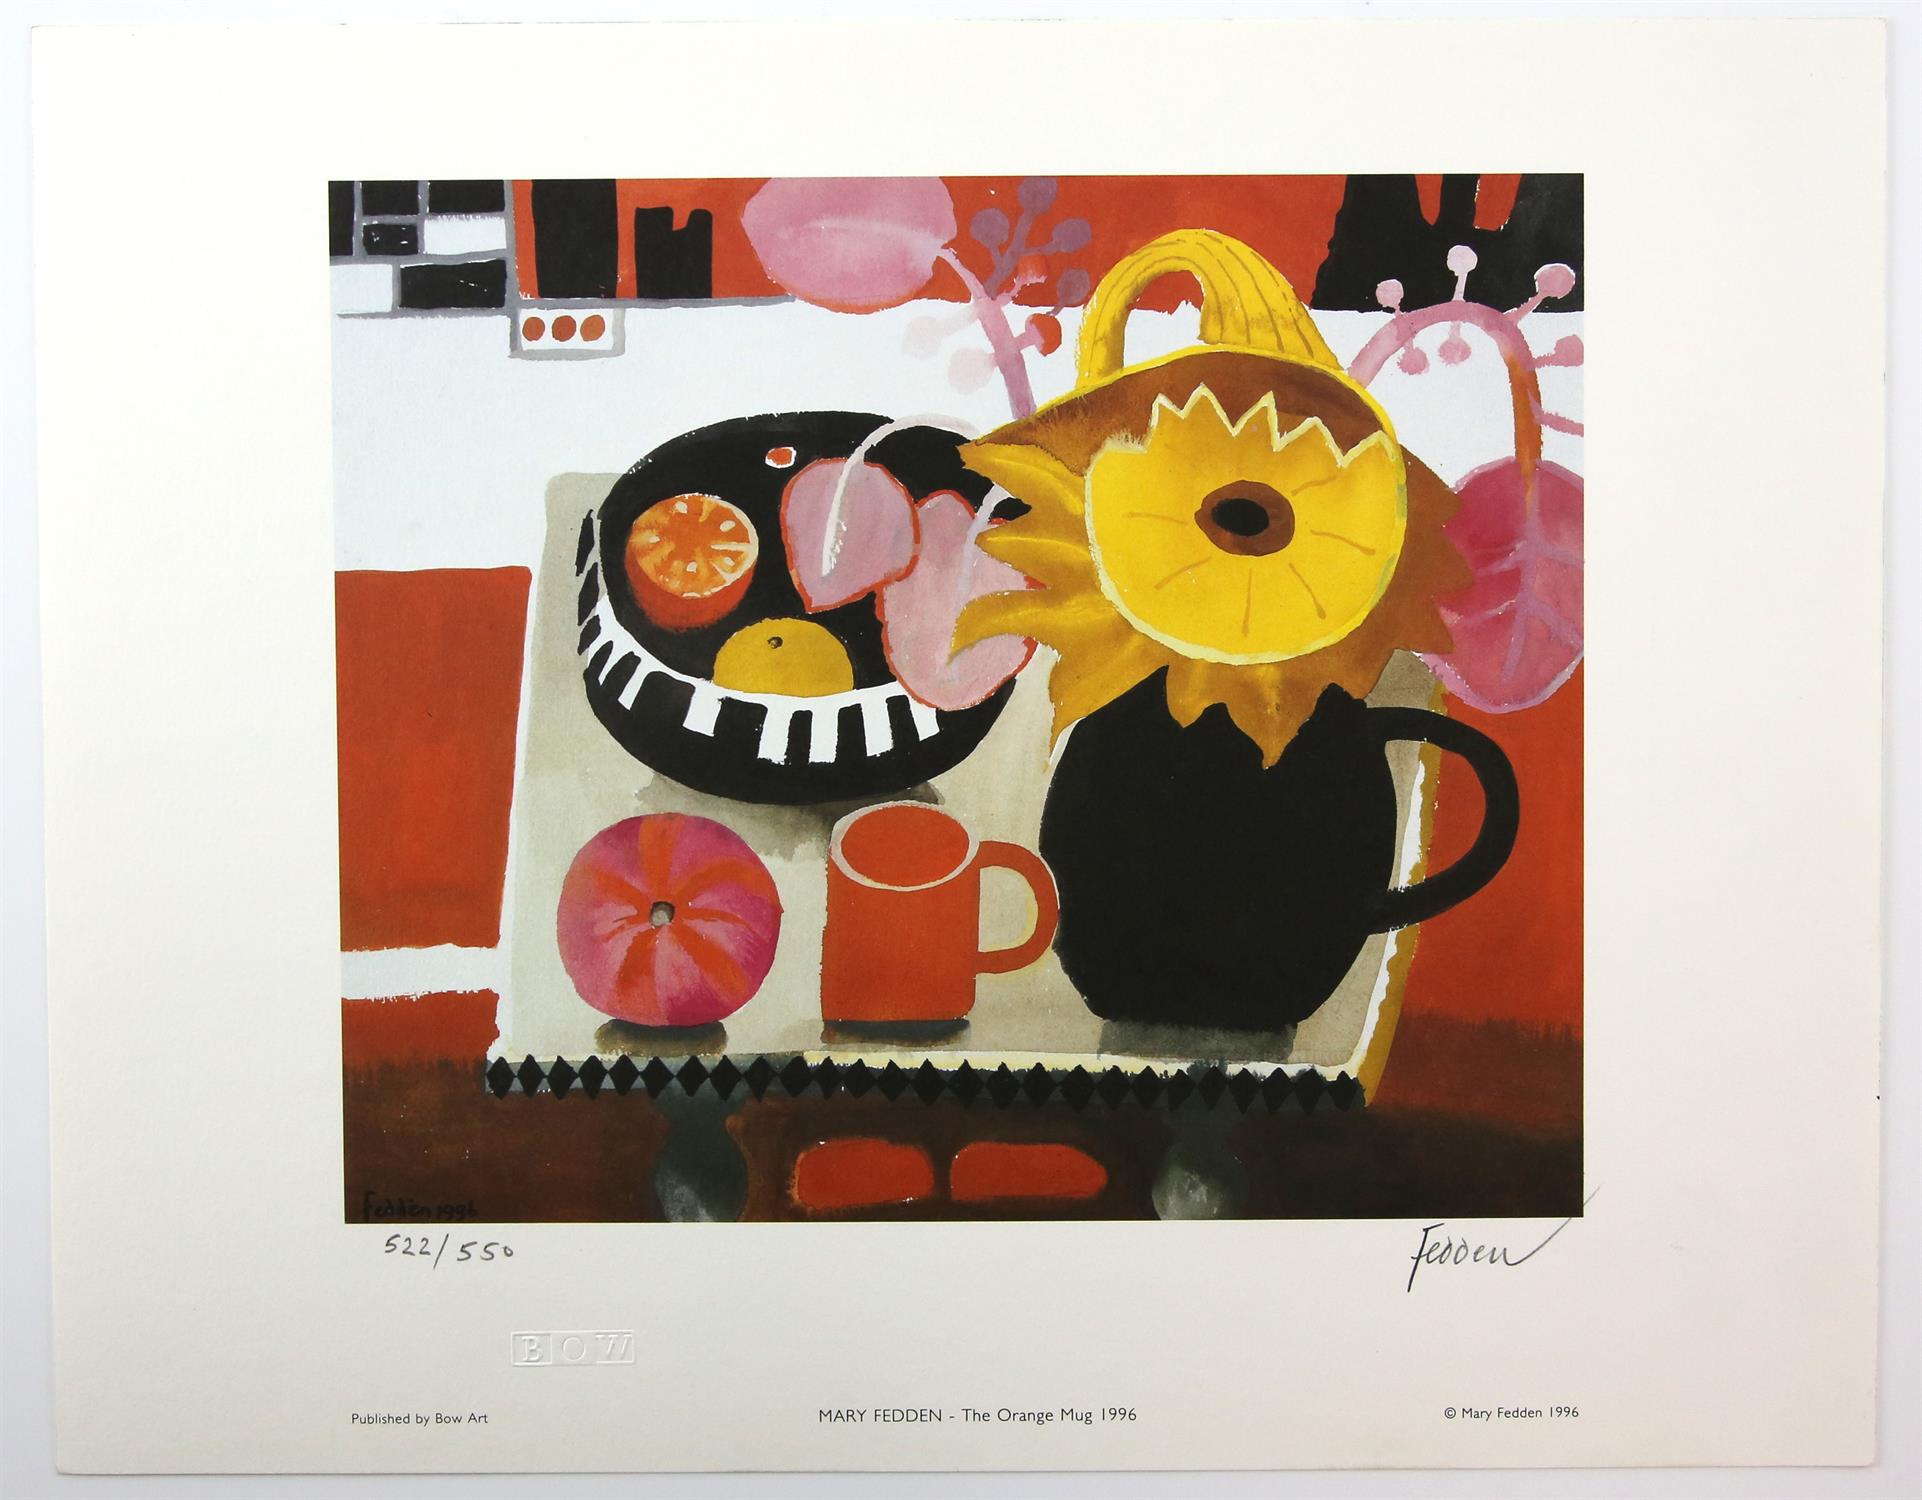 Mary Fedden (British, 1915-2012), 'The Orange Mug', lithograph, signed and numbered 522/550 in - Image 2 of 2